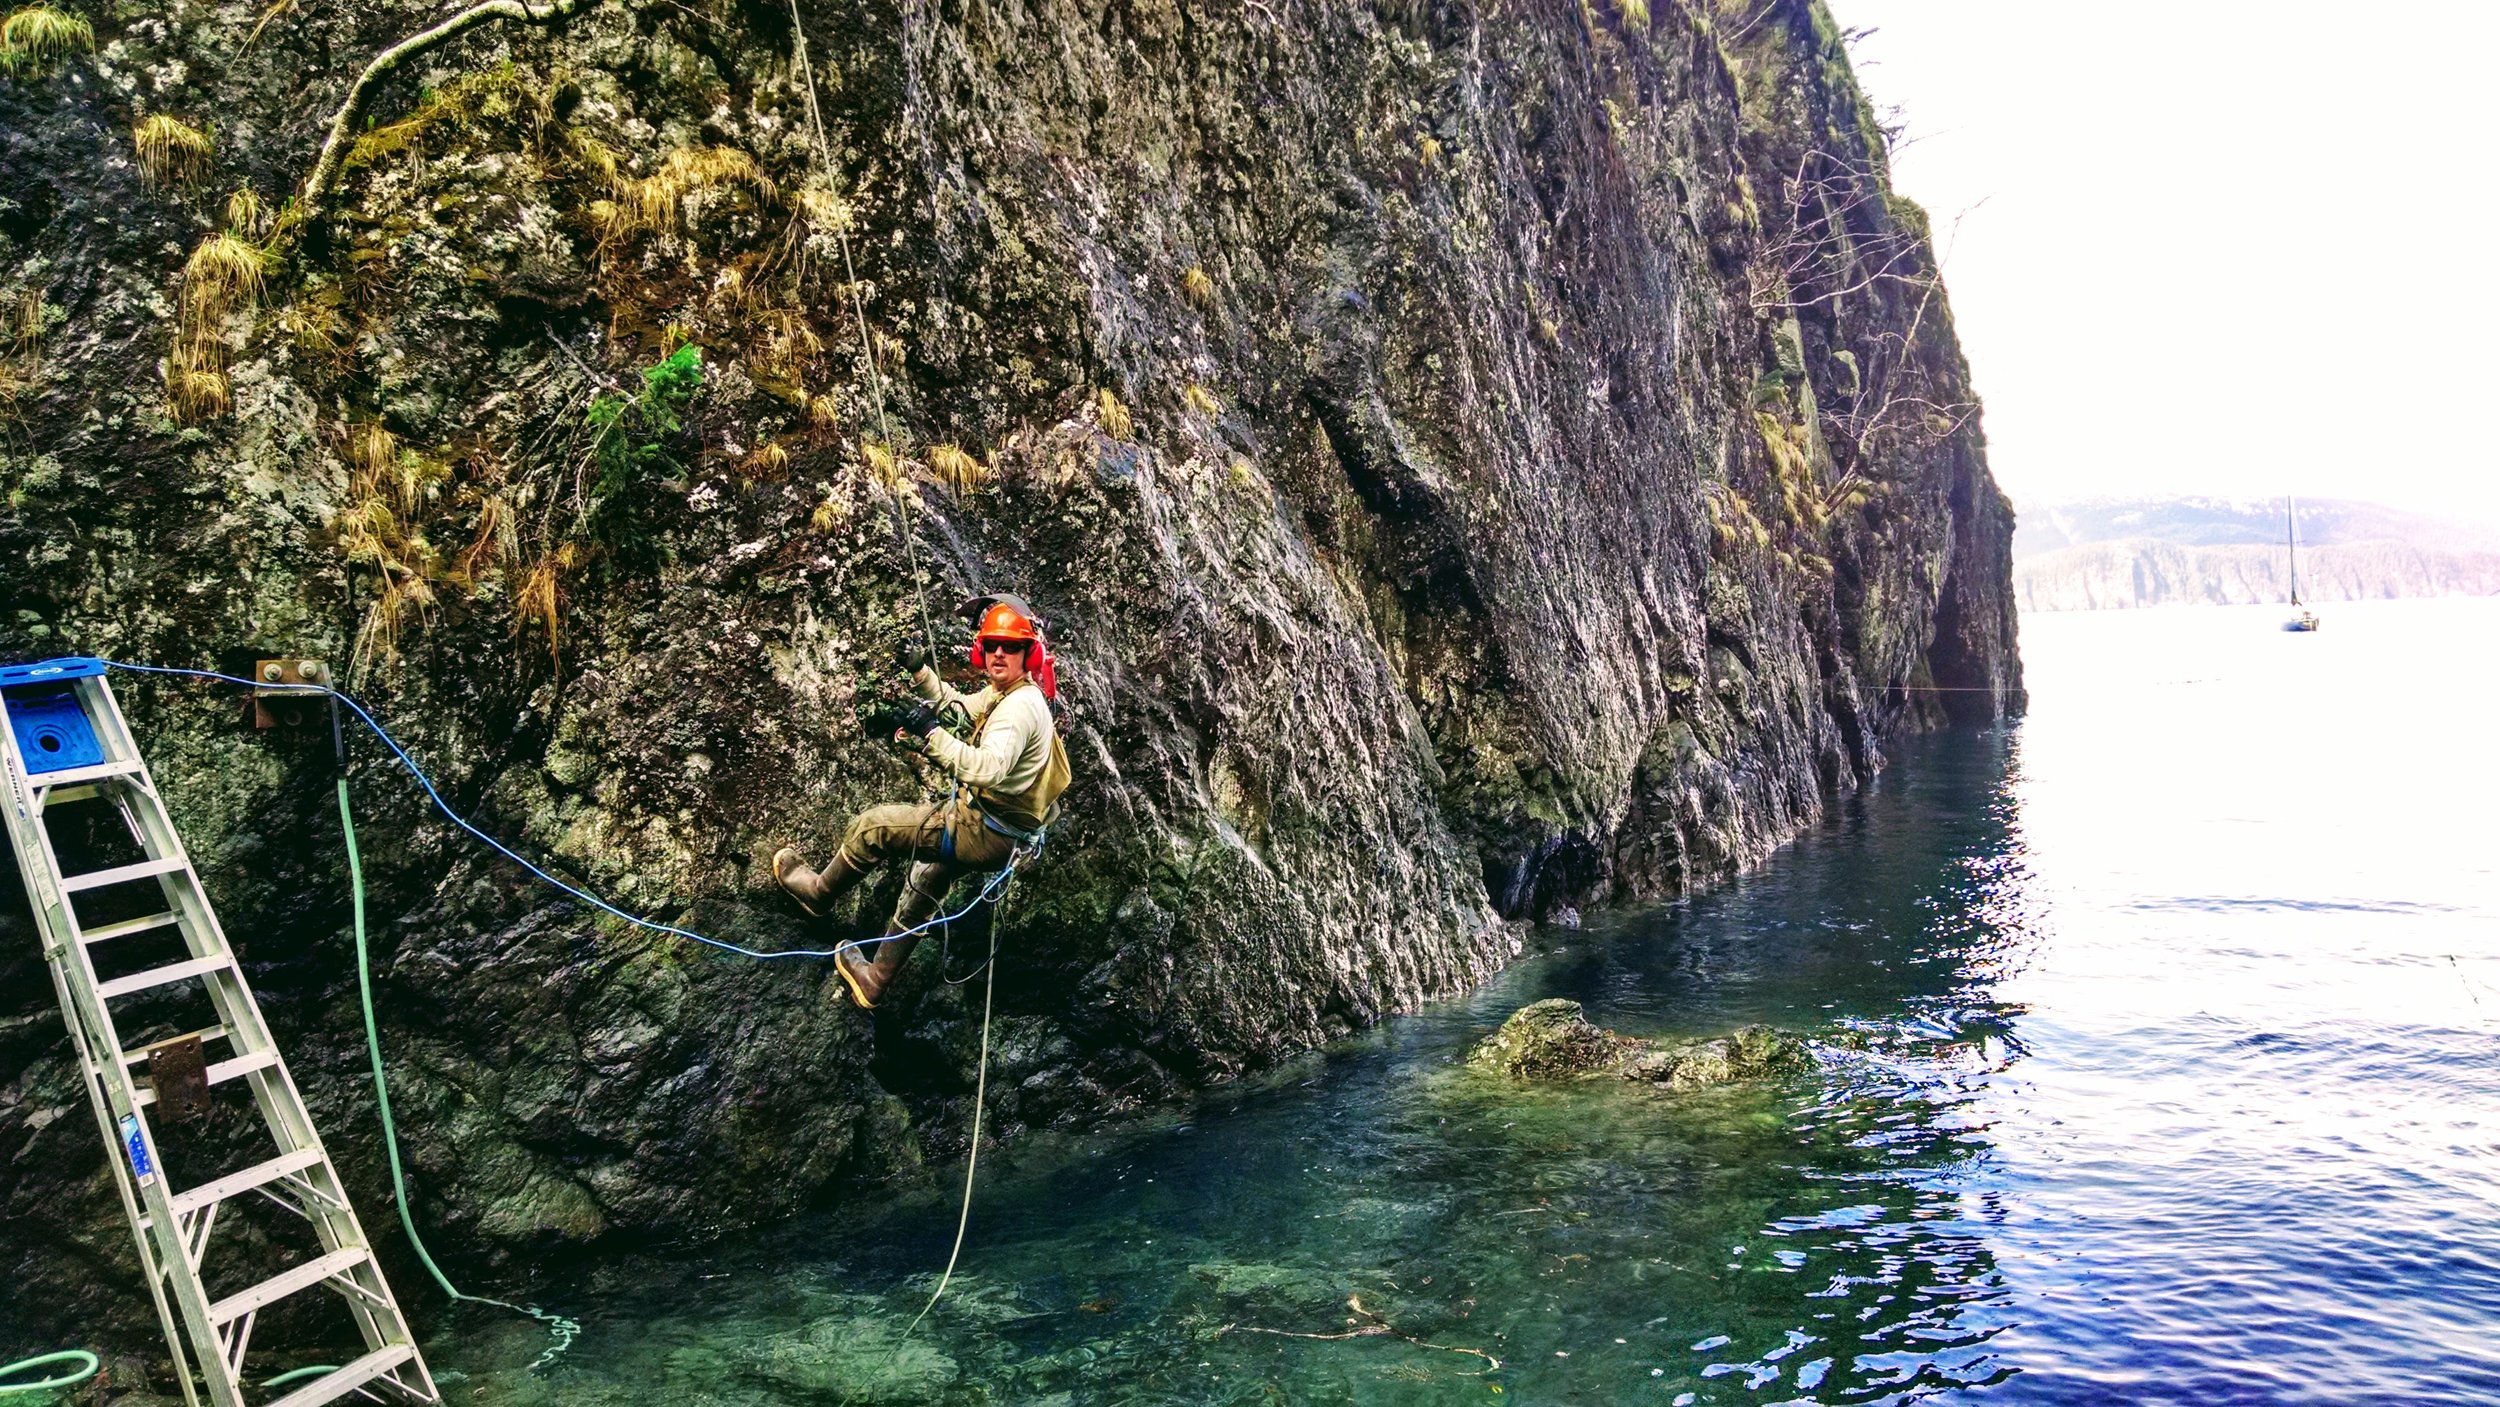  This is one of the very first photos from building Shearwater Cove featuring our dear friend Jesse repelling off the cliff with a hammer drill to drill holes for the steel supports that would be anchored into the cliff wall to carry our dock beams. 